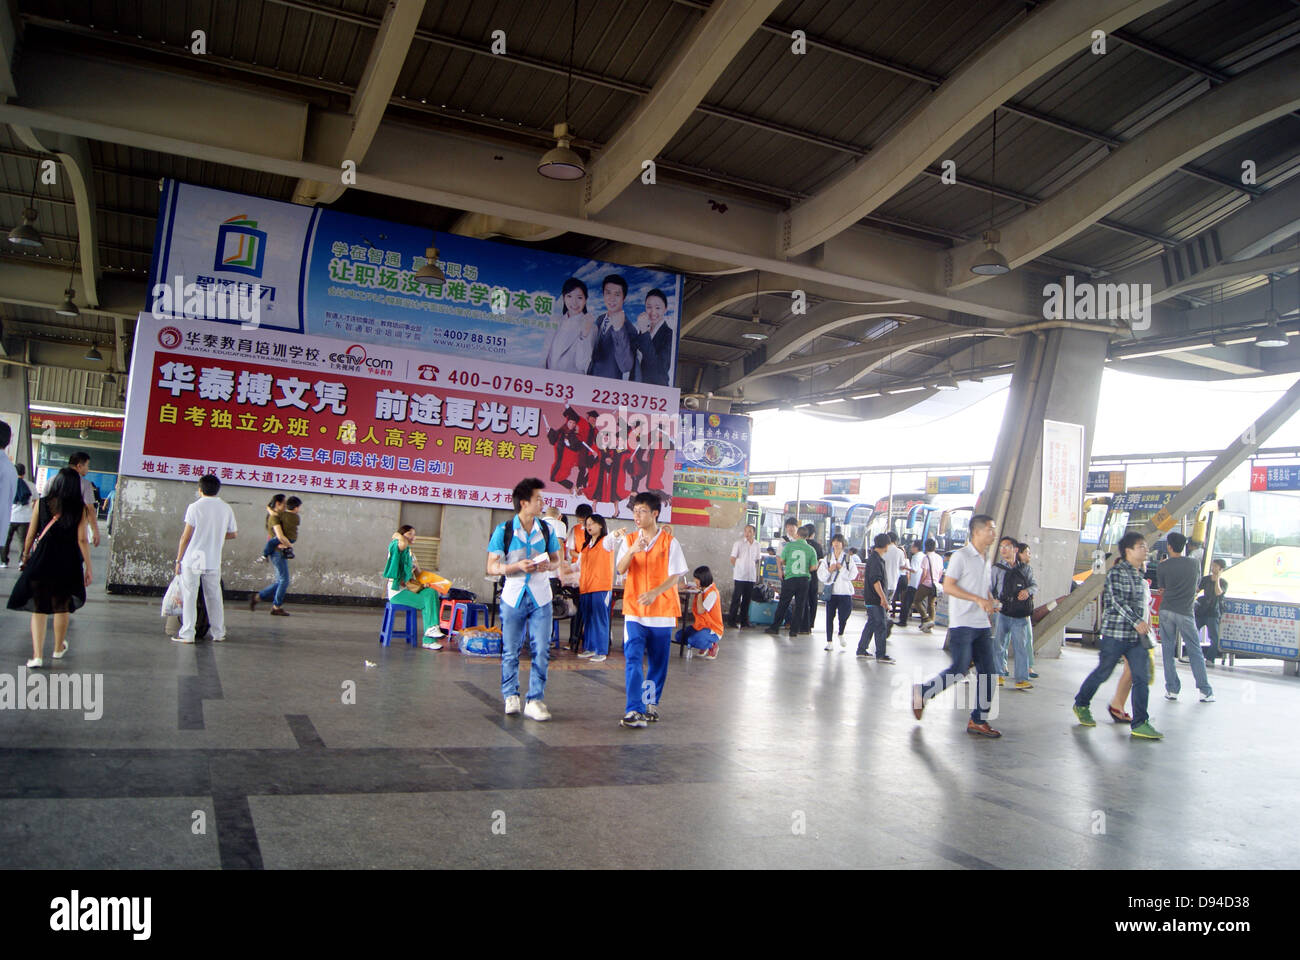 Dongguan bus station of the passenger, in China. Stock Photo